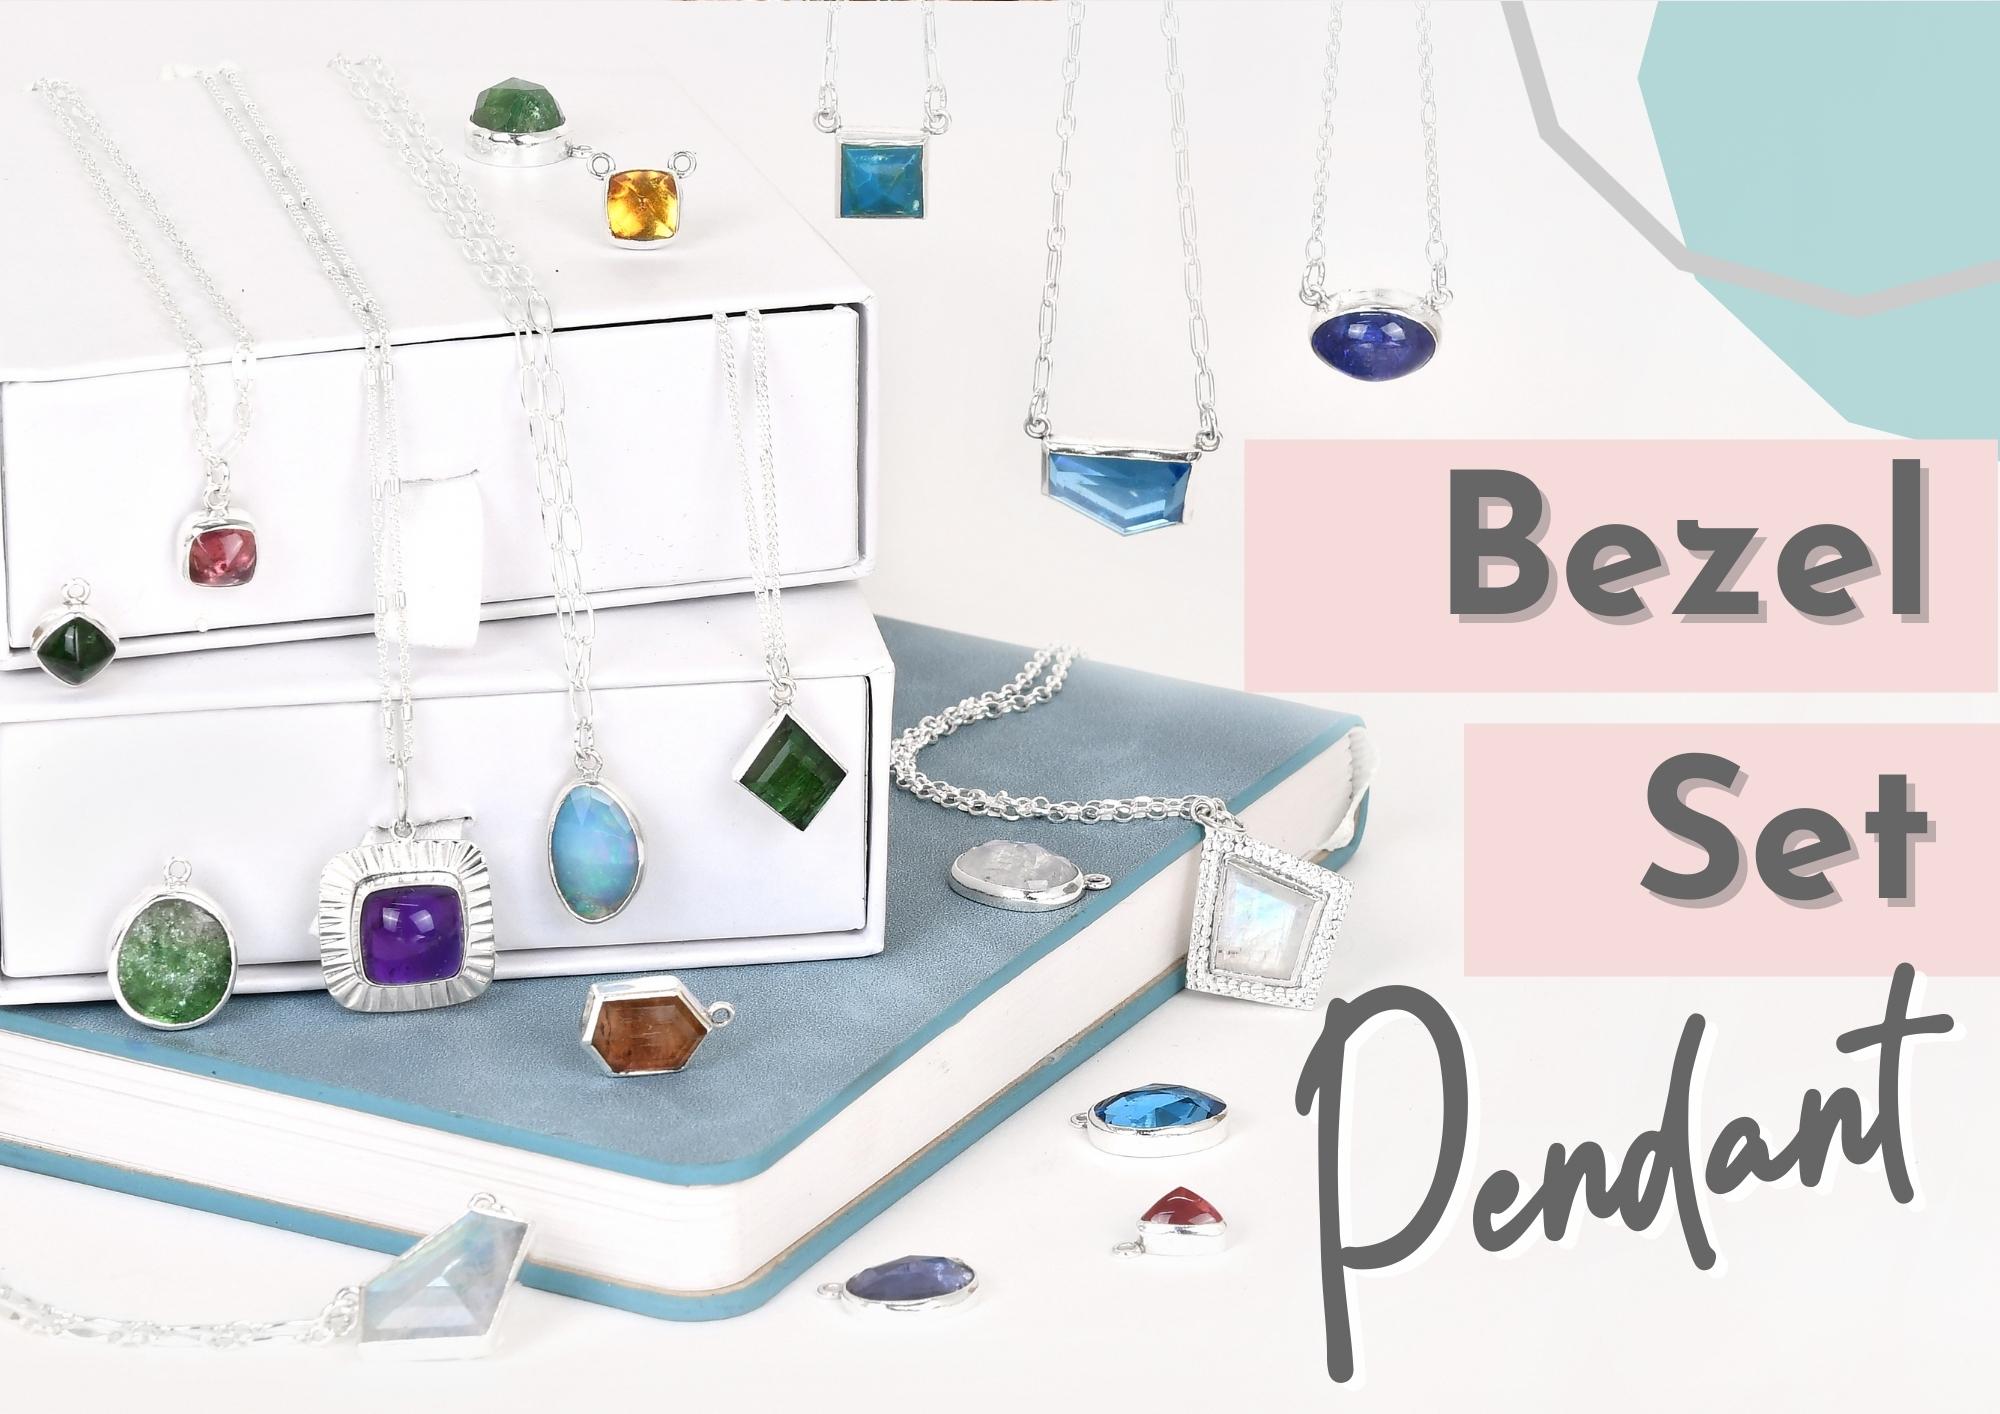 learn how to bezel set gemstones in our online jewellery making class